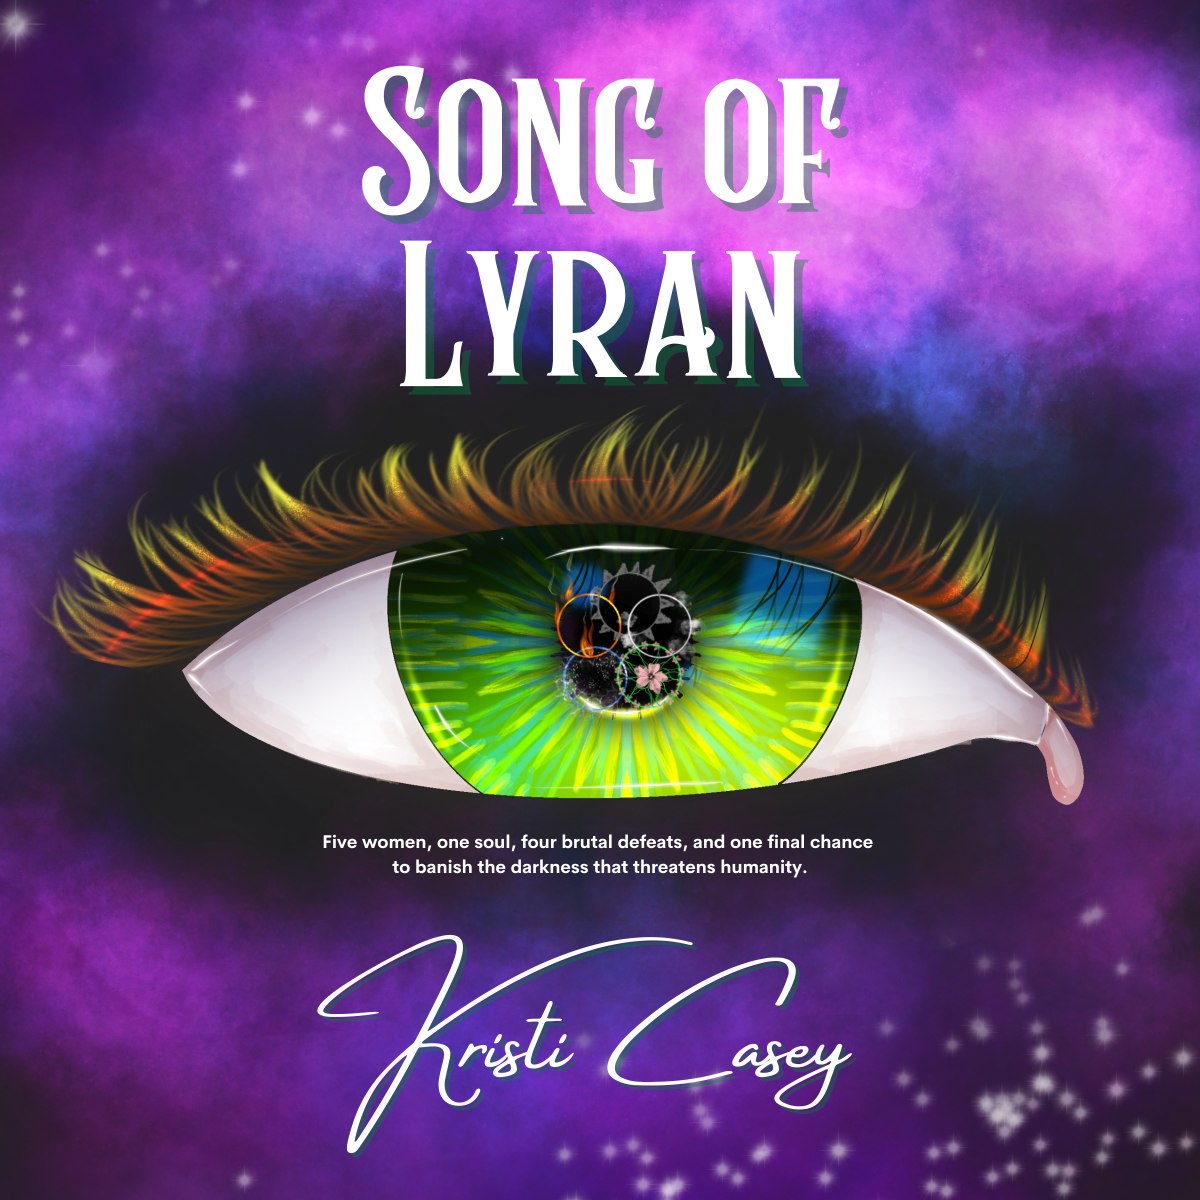 Song of Lyran audiobook now available!